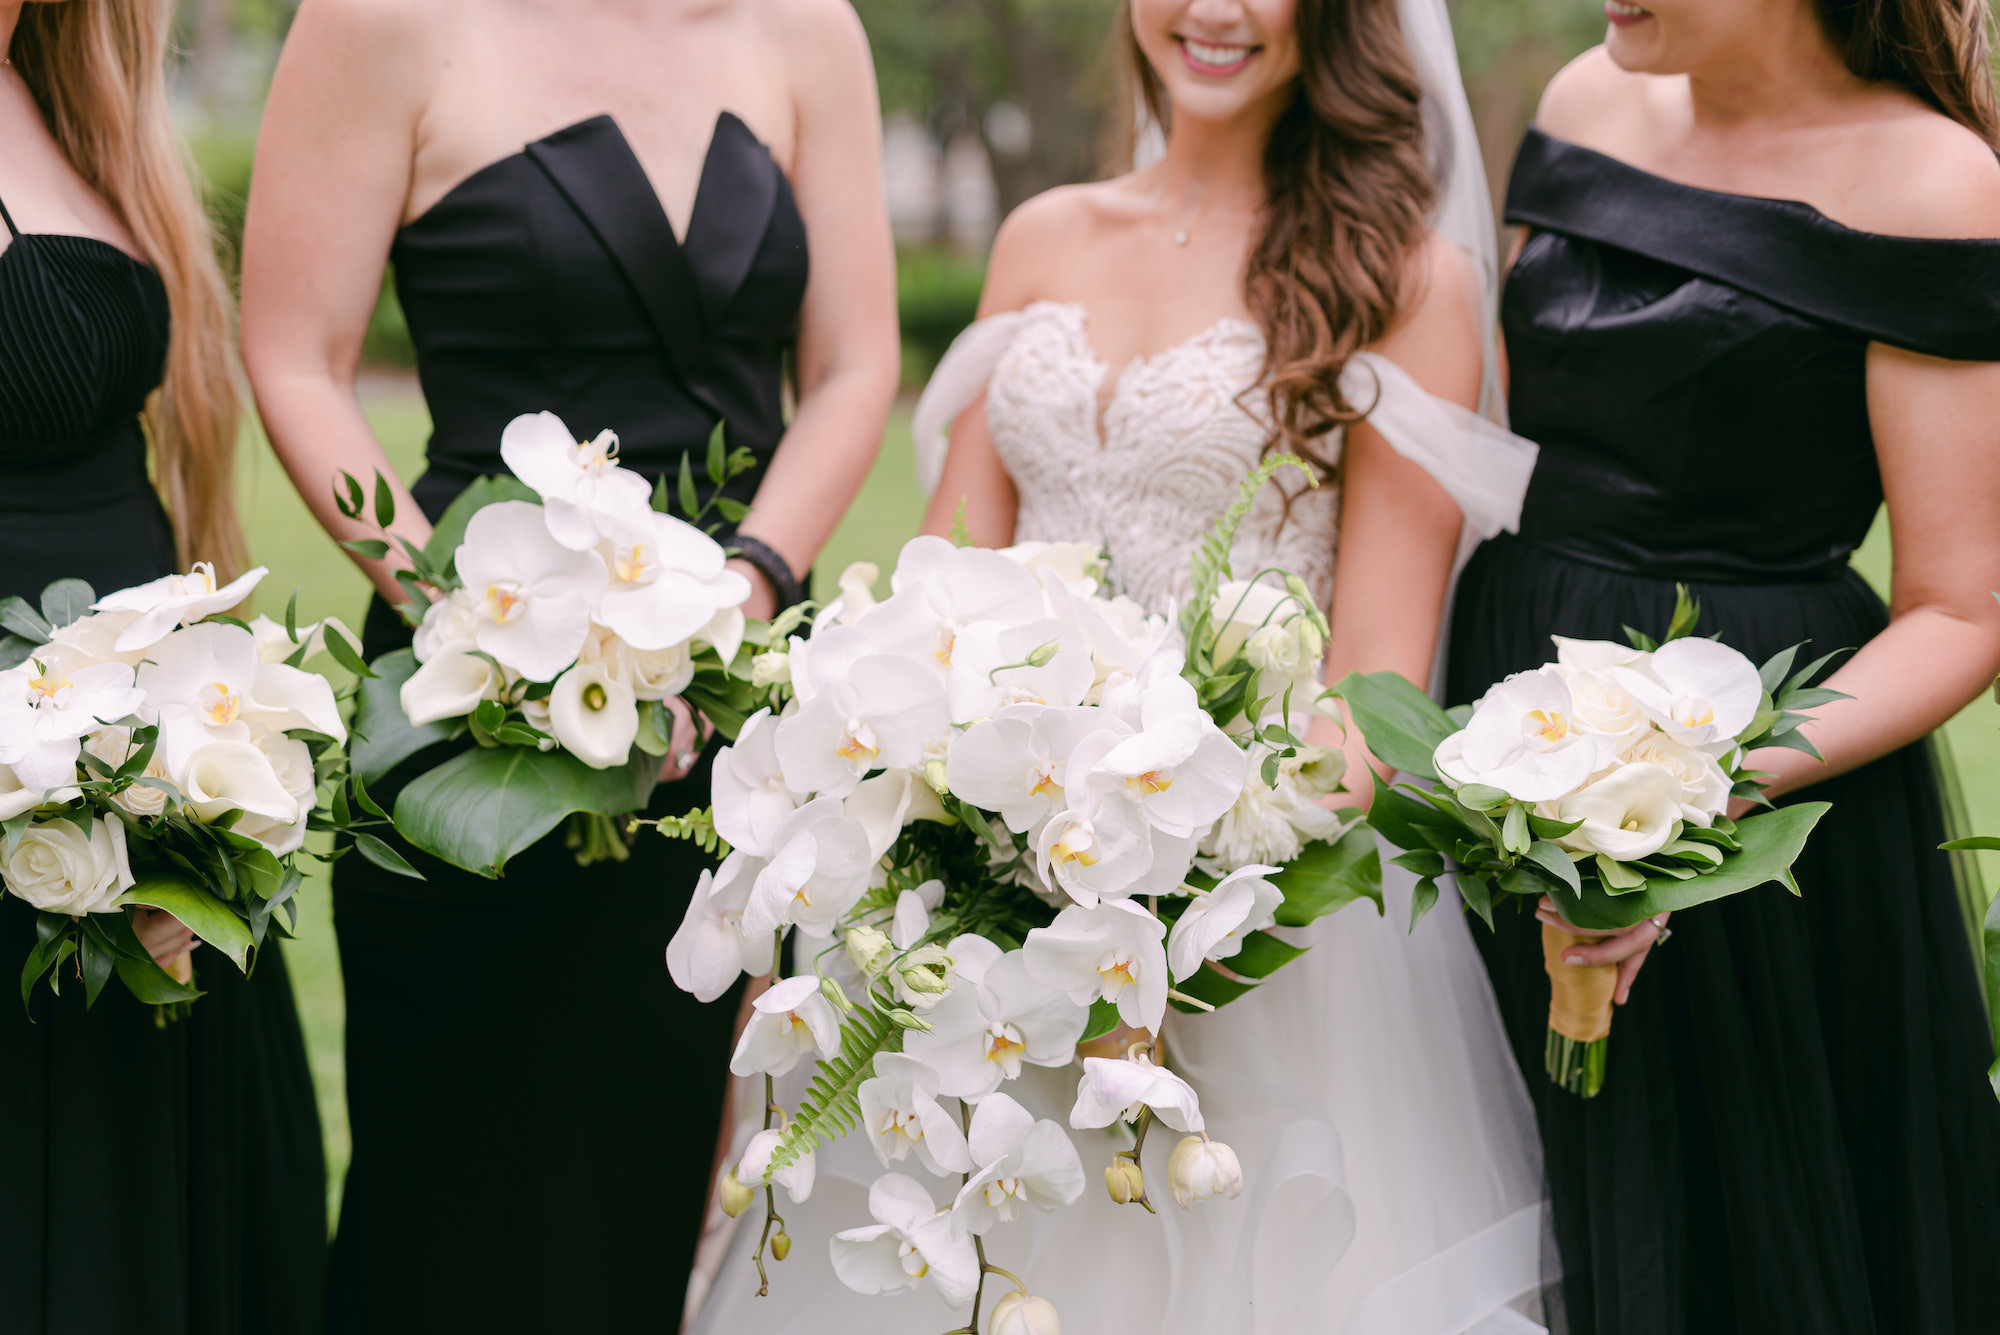 Timeless Black Bridesmaid Dresses Inspiration and White Orchard Wedding Bouquet | Tampa.Wedding Florist FH Events